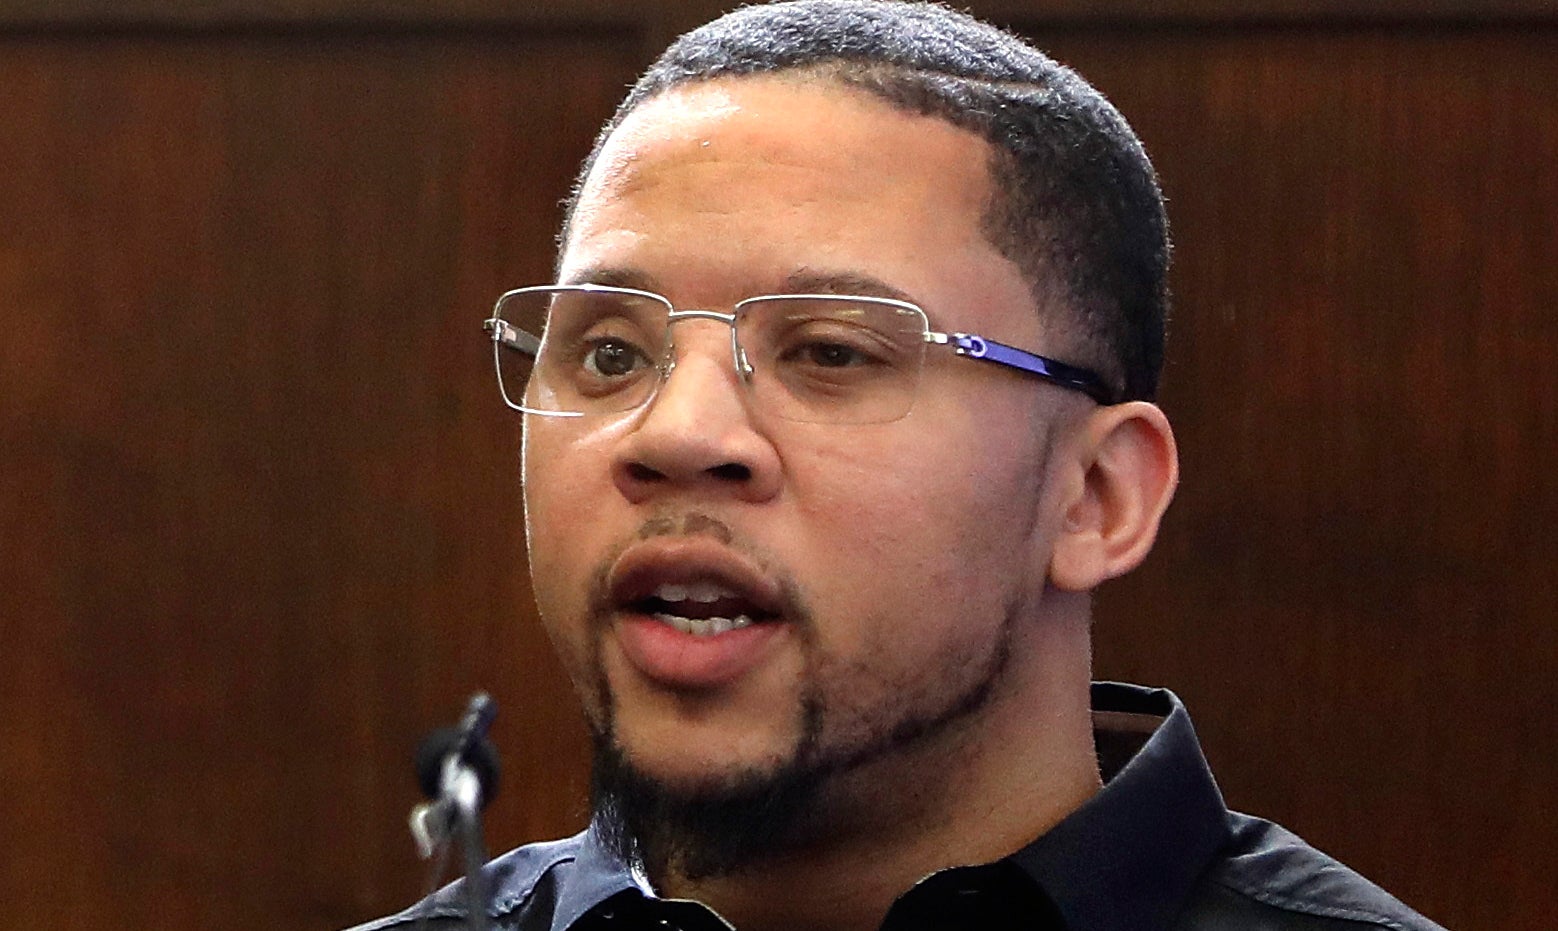 Aaron Hernandez's Brother To Testify For Prosecution At Double-Murder Trial